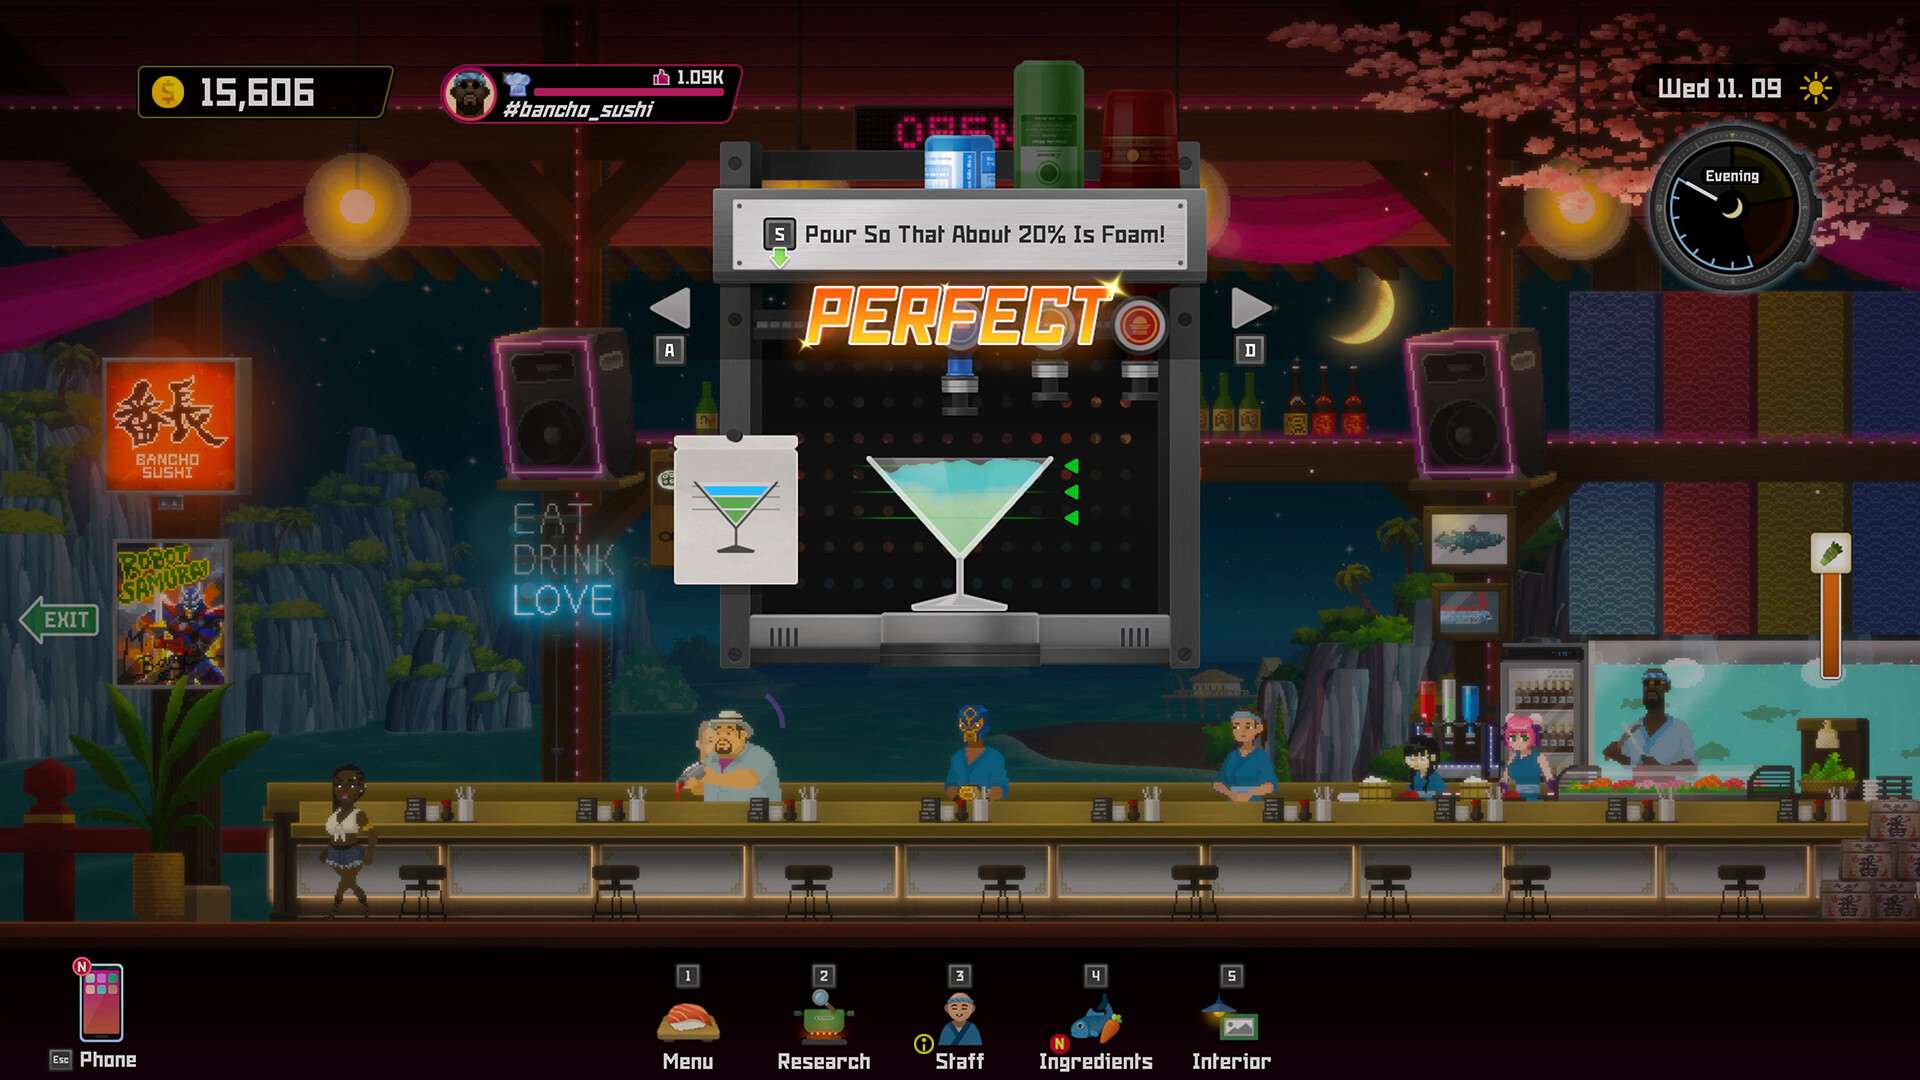 The cocktail minigame from Dave the Diver